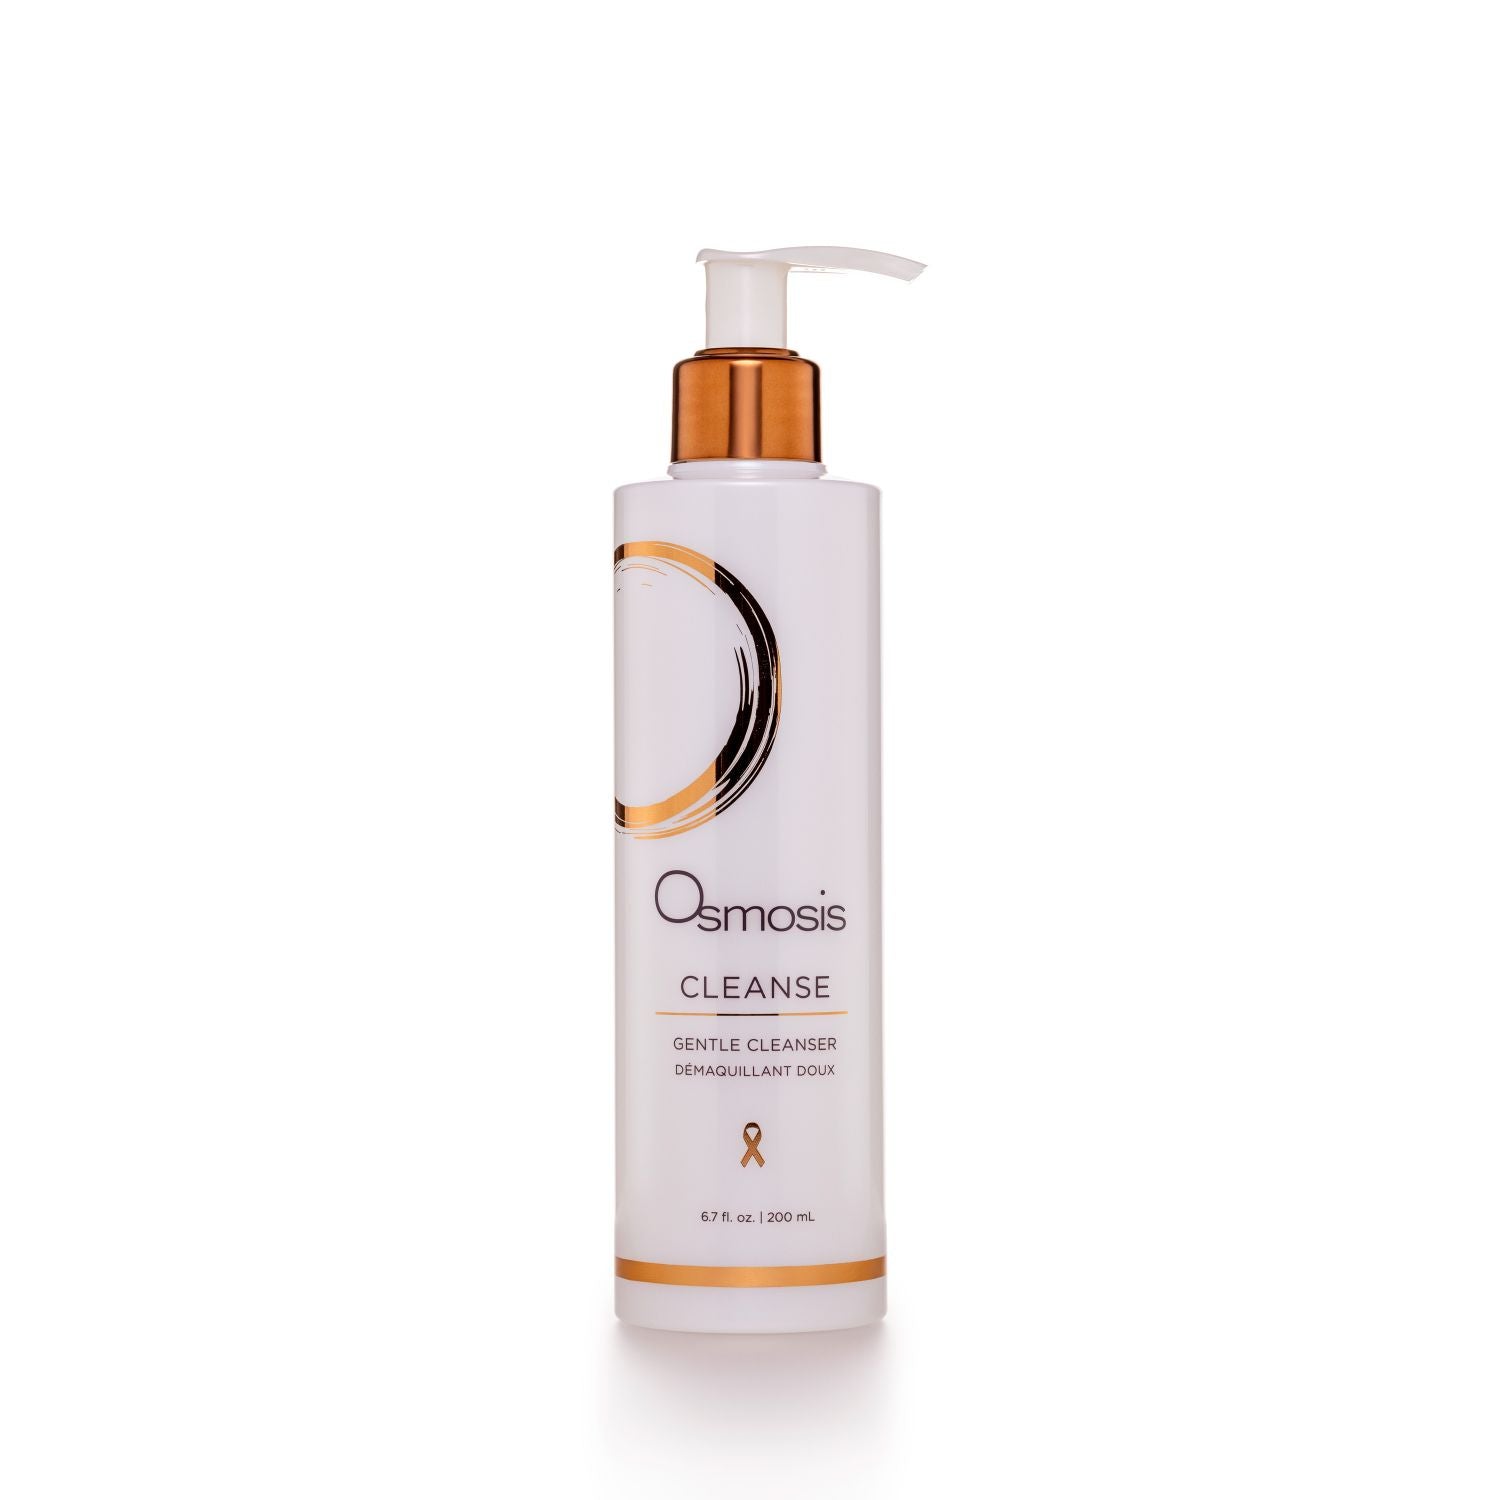 Osmosis-Cleanse-gentle-cleanser-6.7oz-200ml